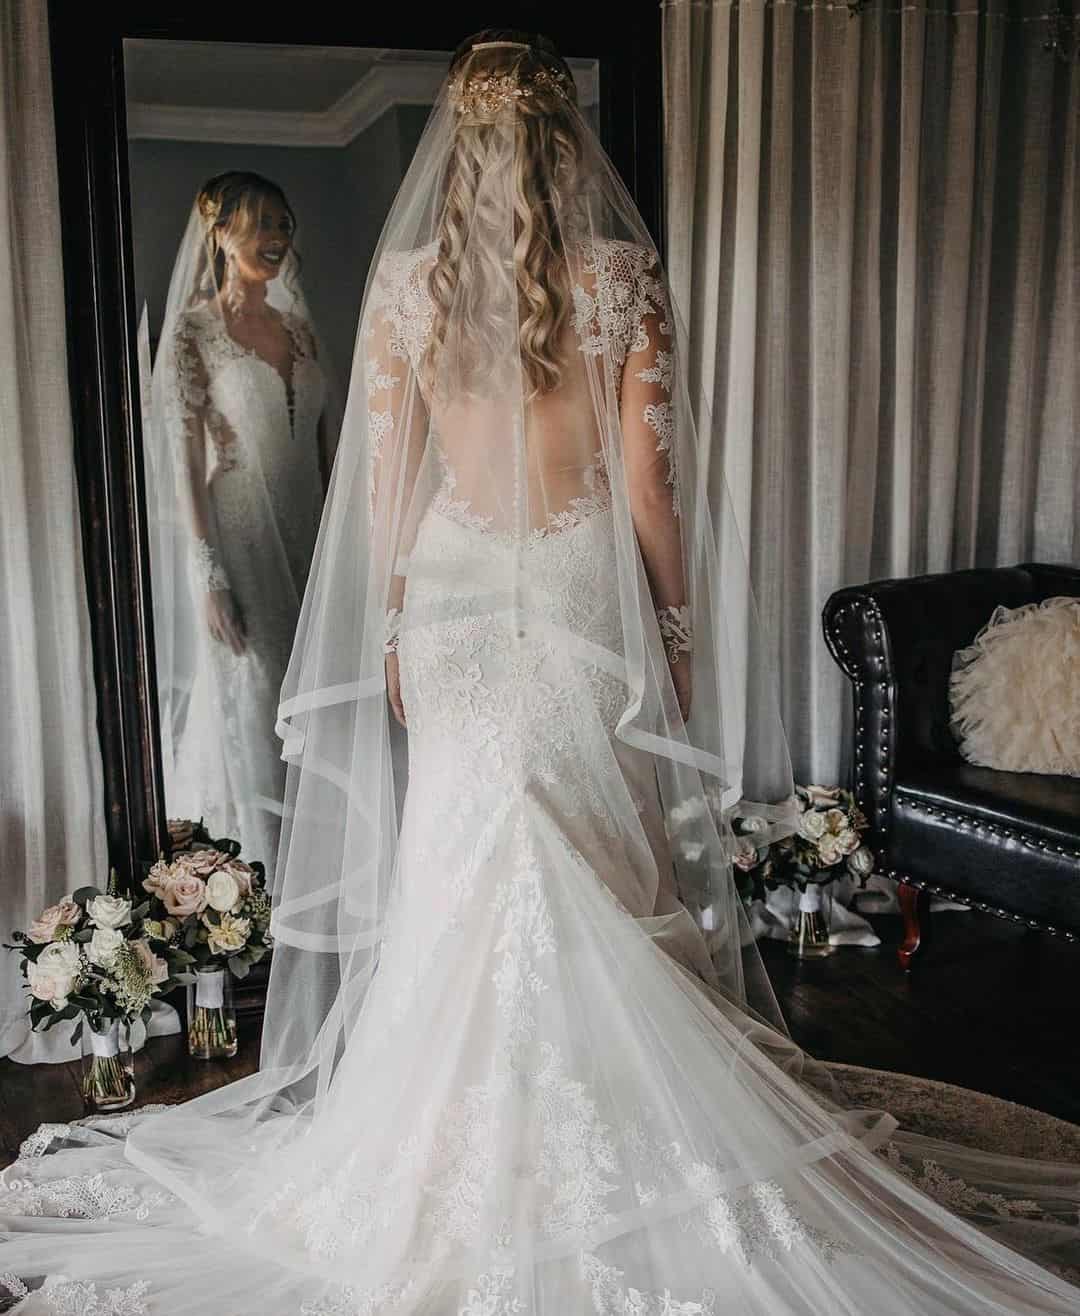 Loose Curls Wedding Hairstyle With Veil 